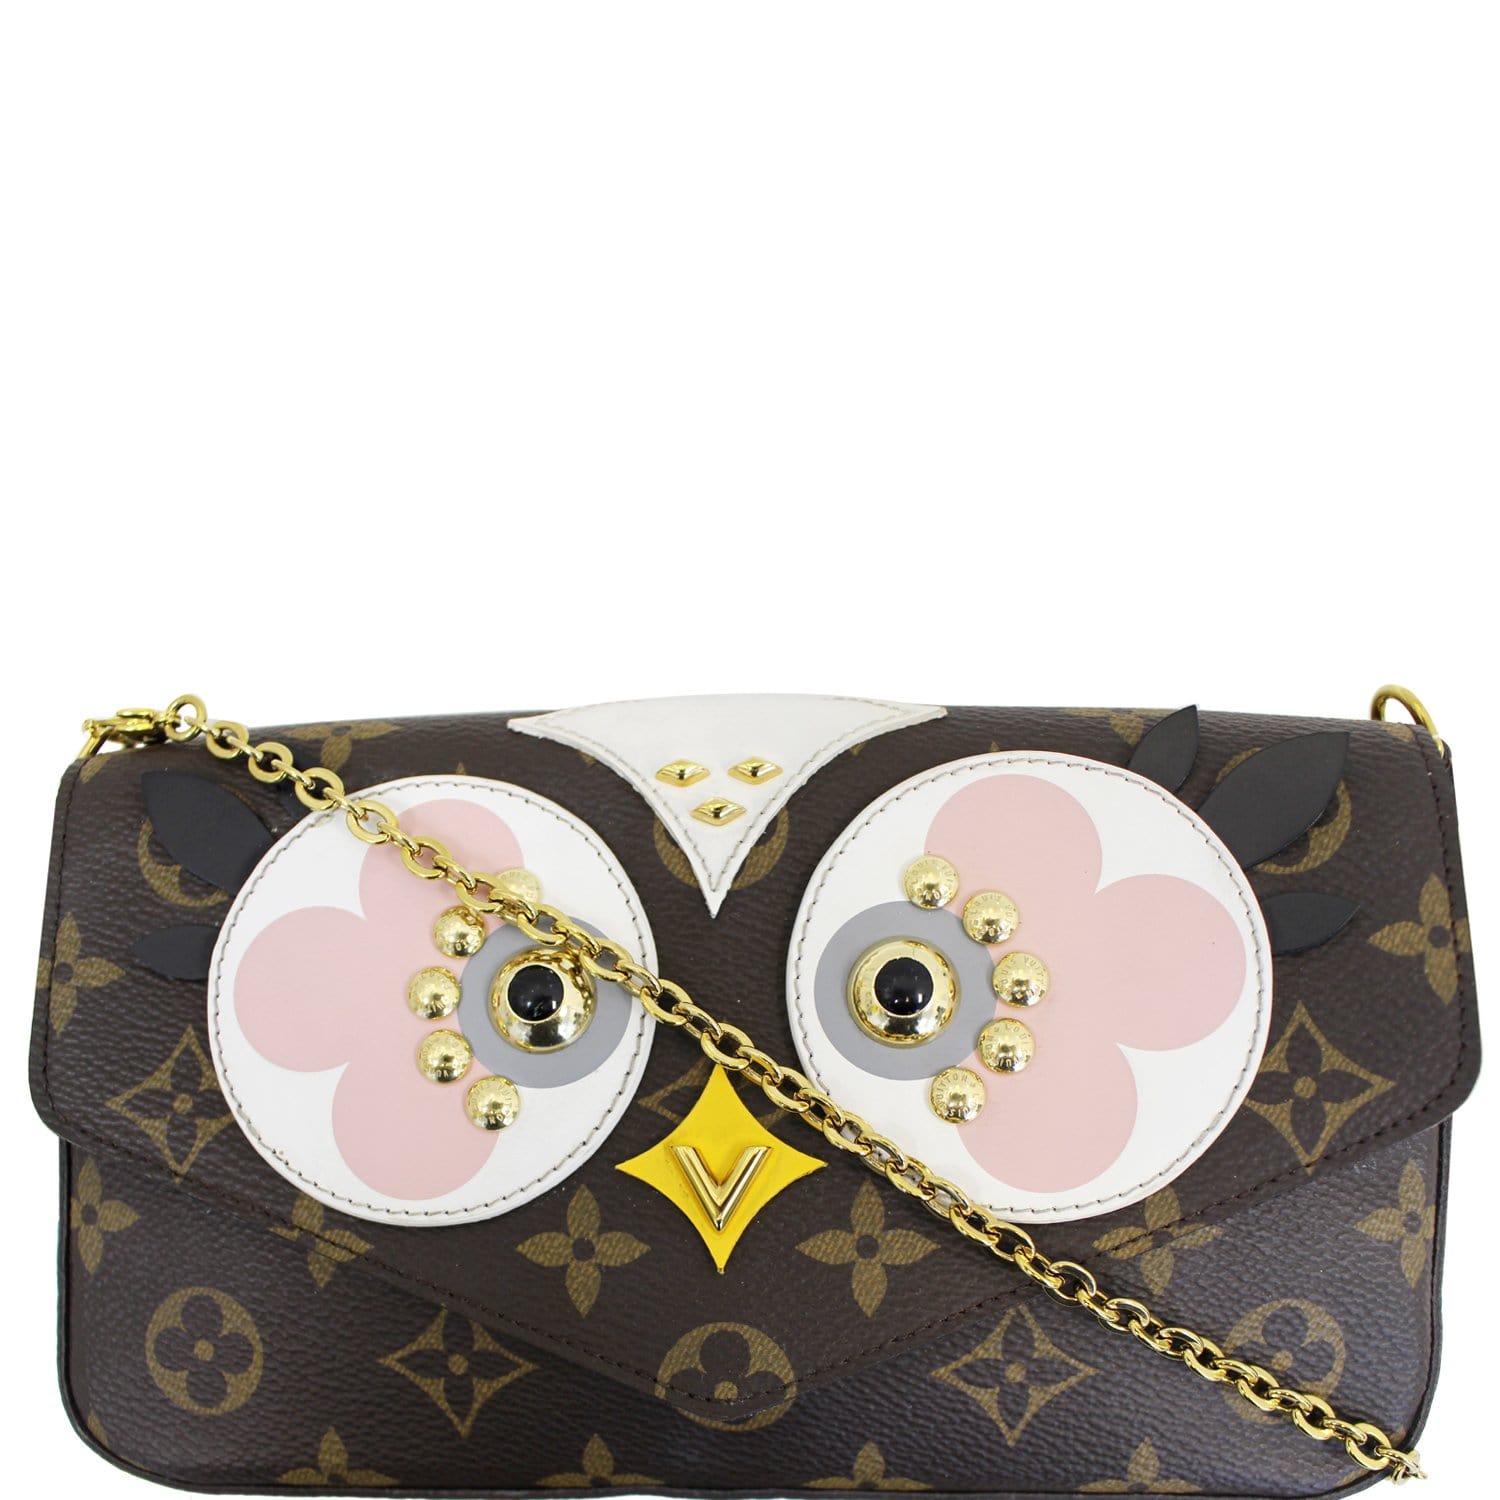 Louis Vuitton Owl - 3 For Sale on 1stDibs